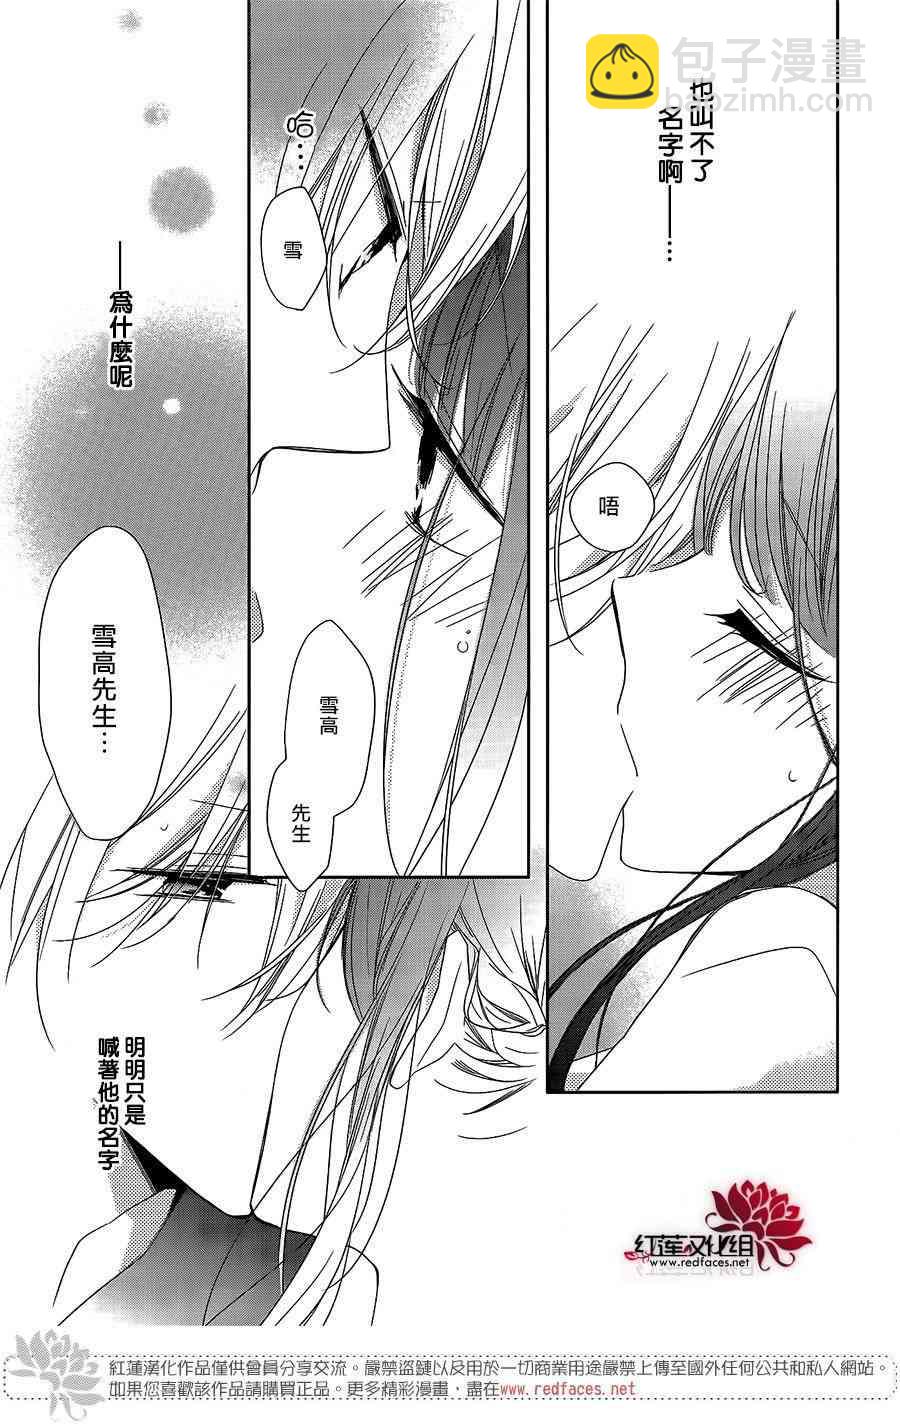 If given a second chance - 7话 - 3